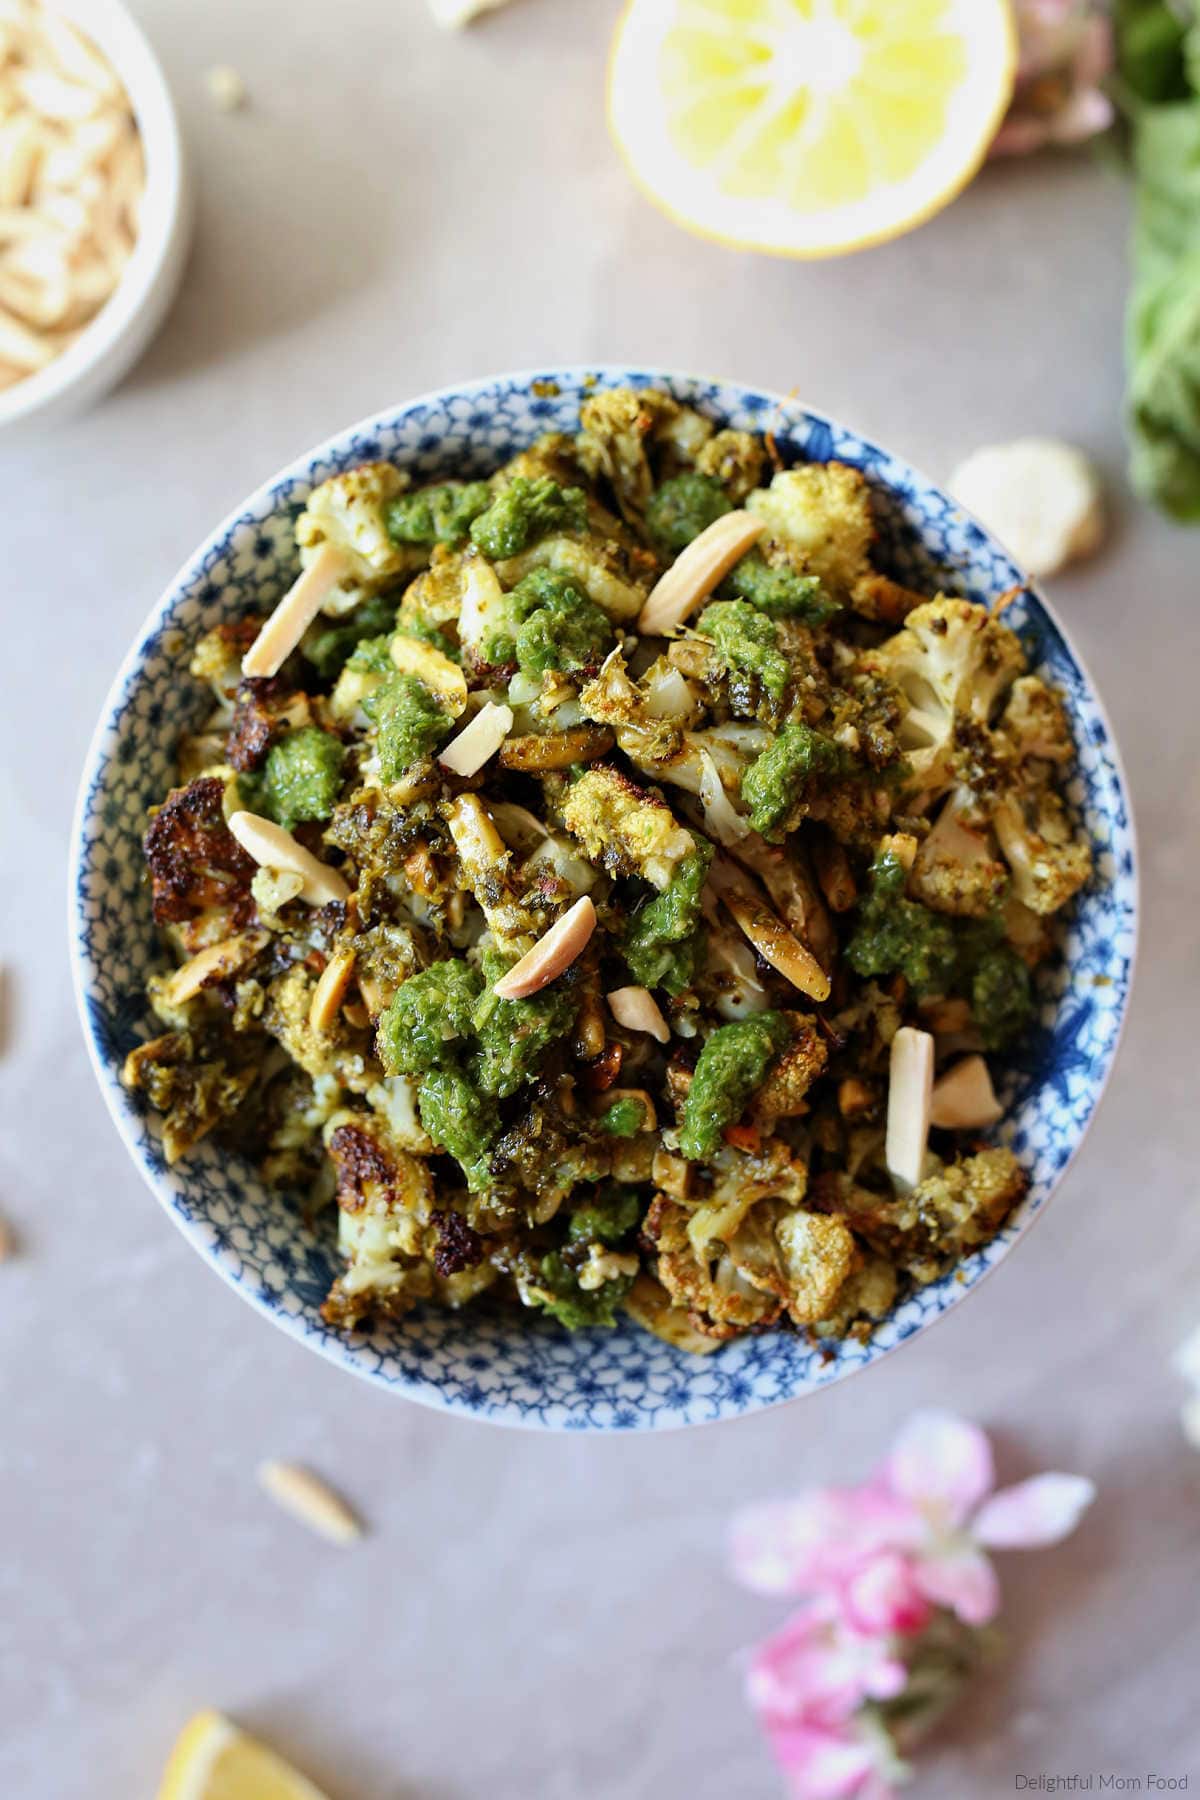 pesto, cauliflower, almond slivers roasted together and served in a bowl